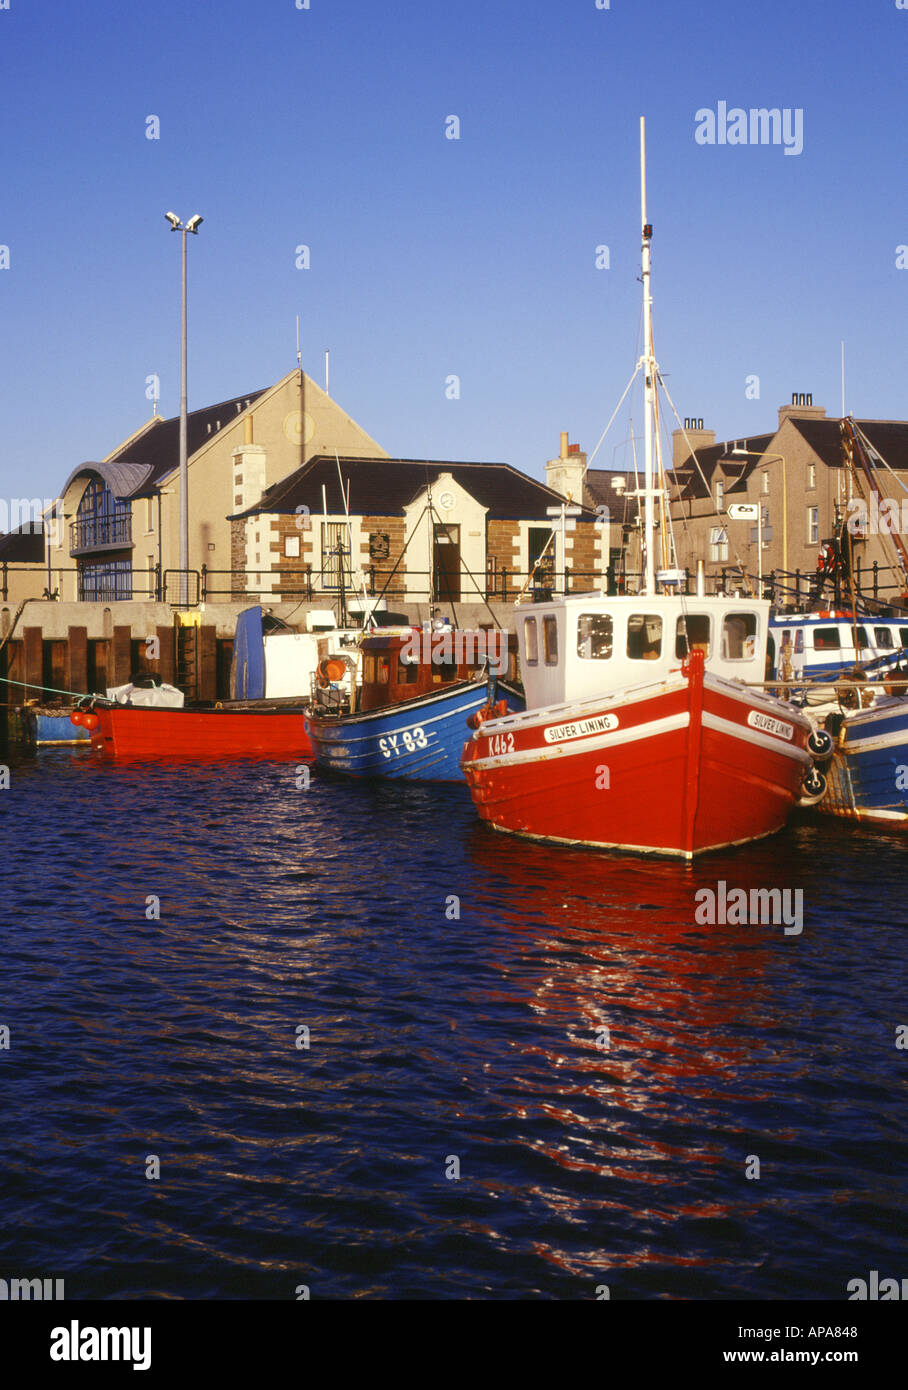 dh Harbour KIRKWALL ORKNEY Scotland Fishing boats waterfront quayside red boat fishingboats scottish harbor Stock Photo